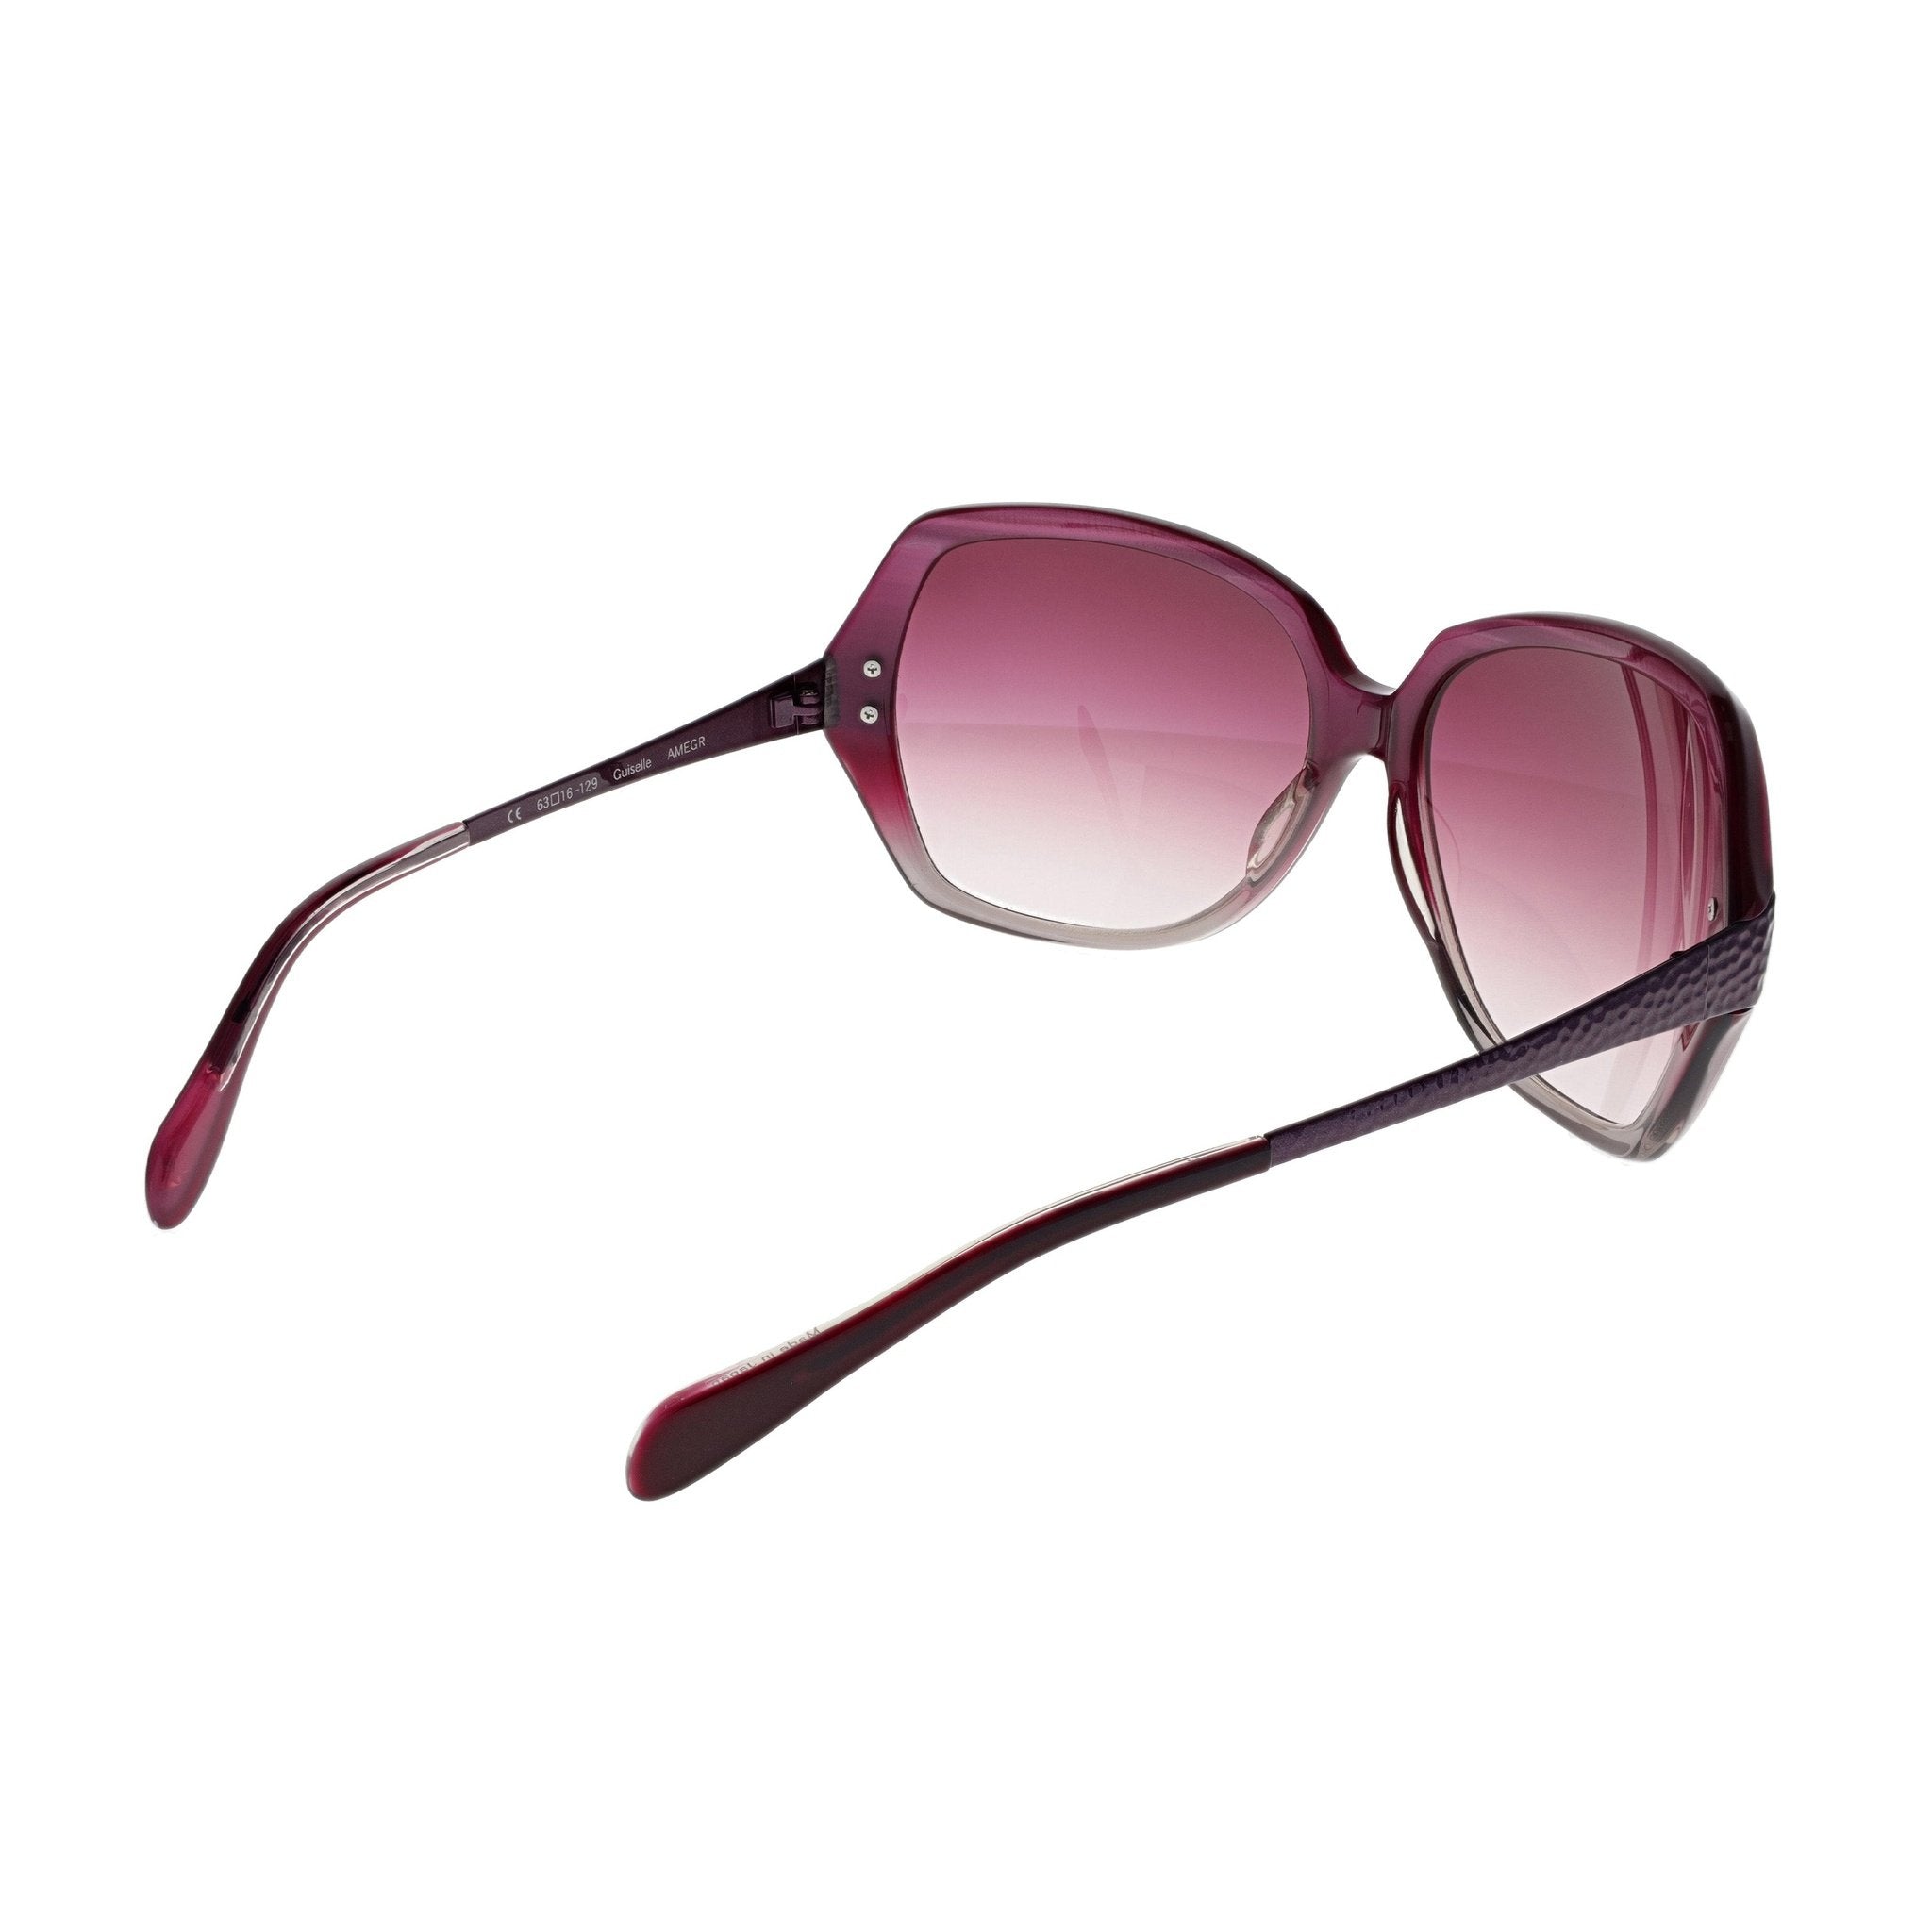 Oliver Peoples Guiselle Sunglasses - Amethyst